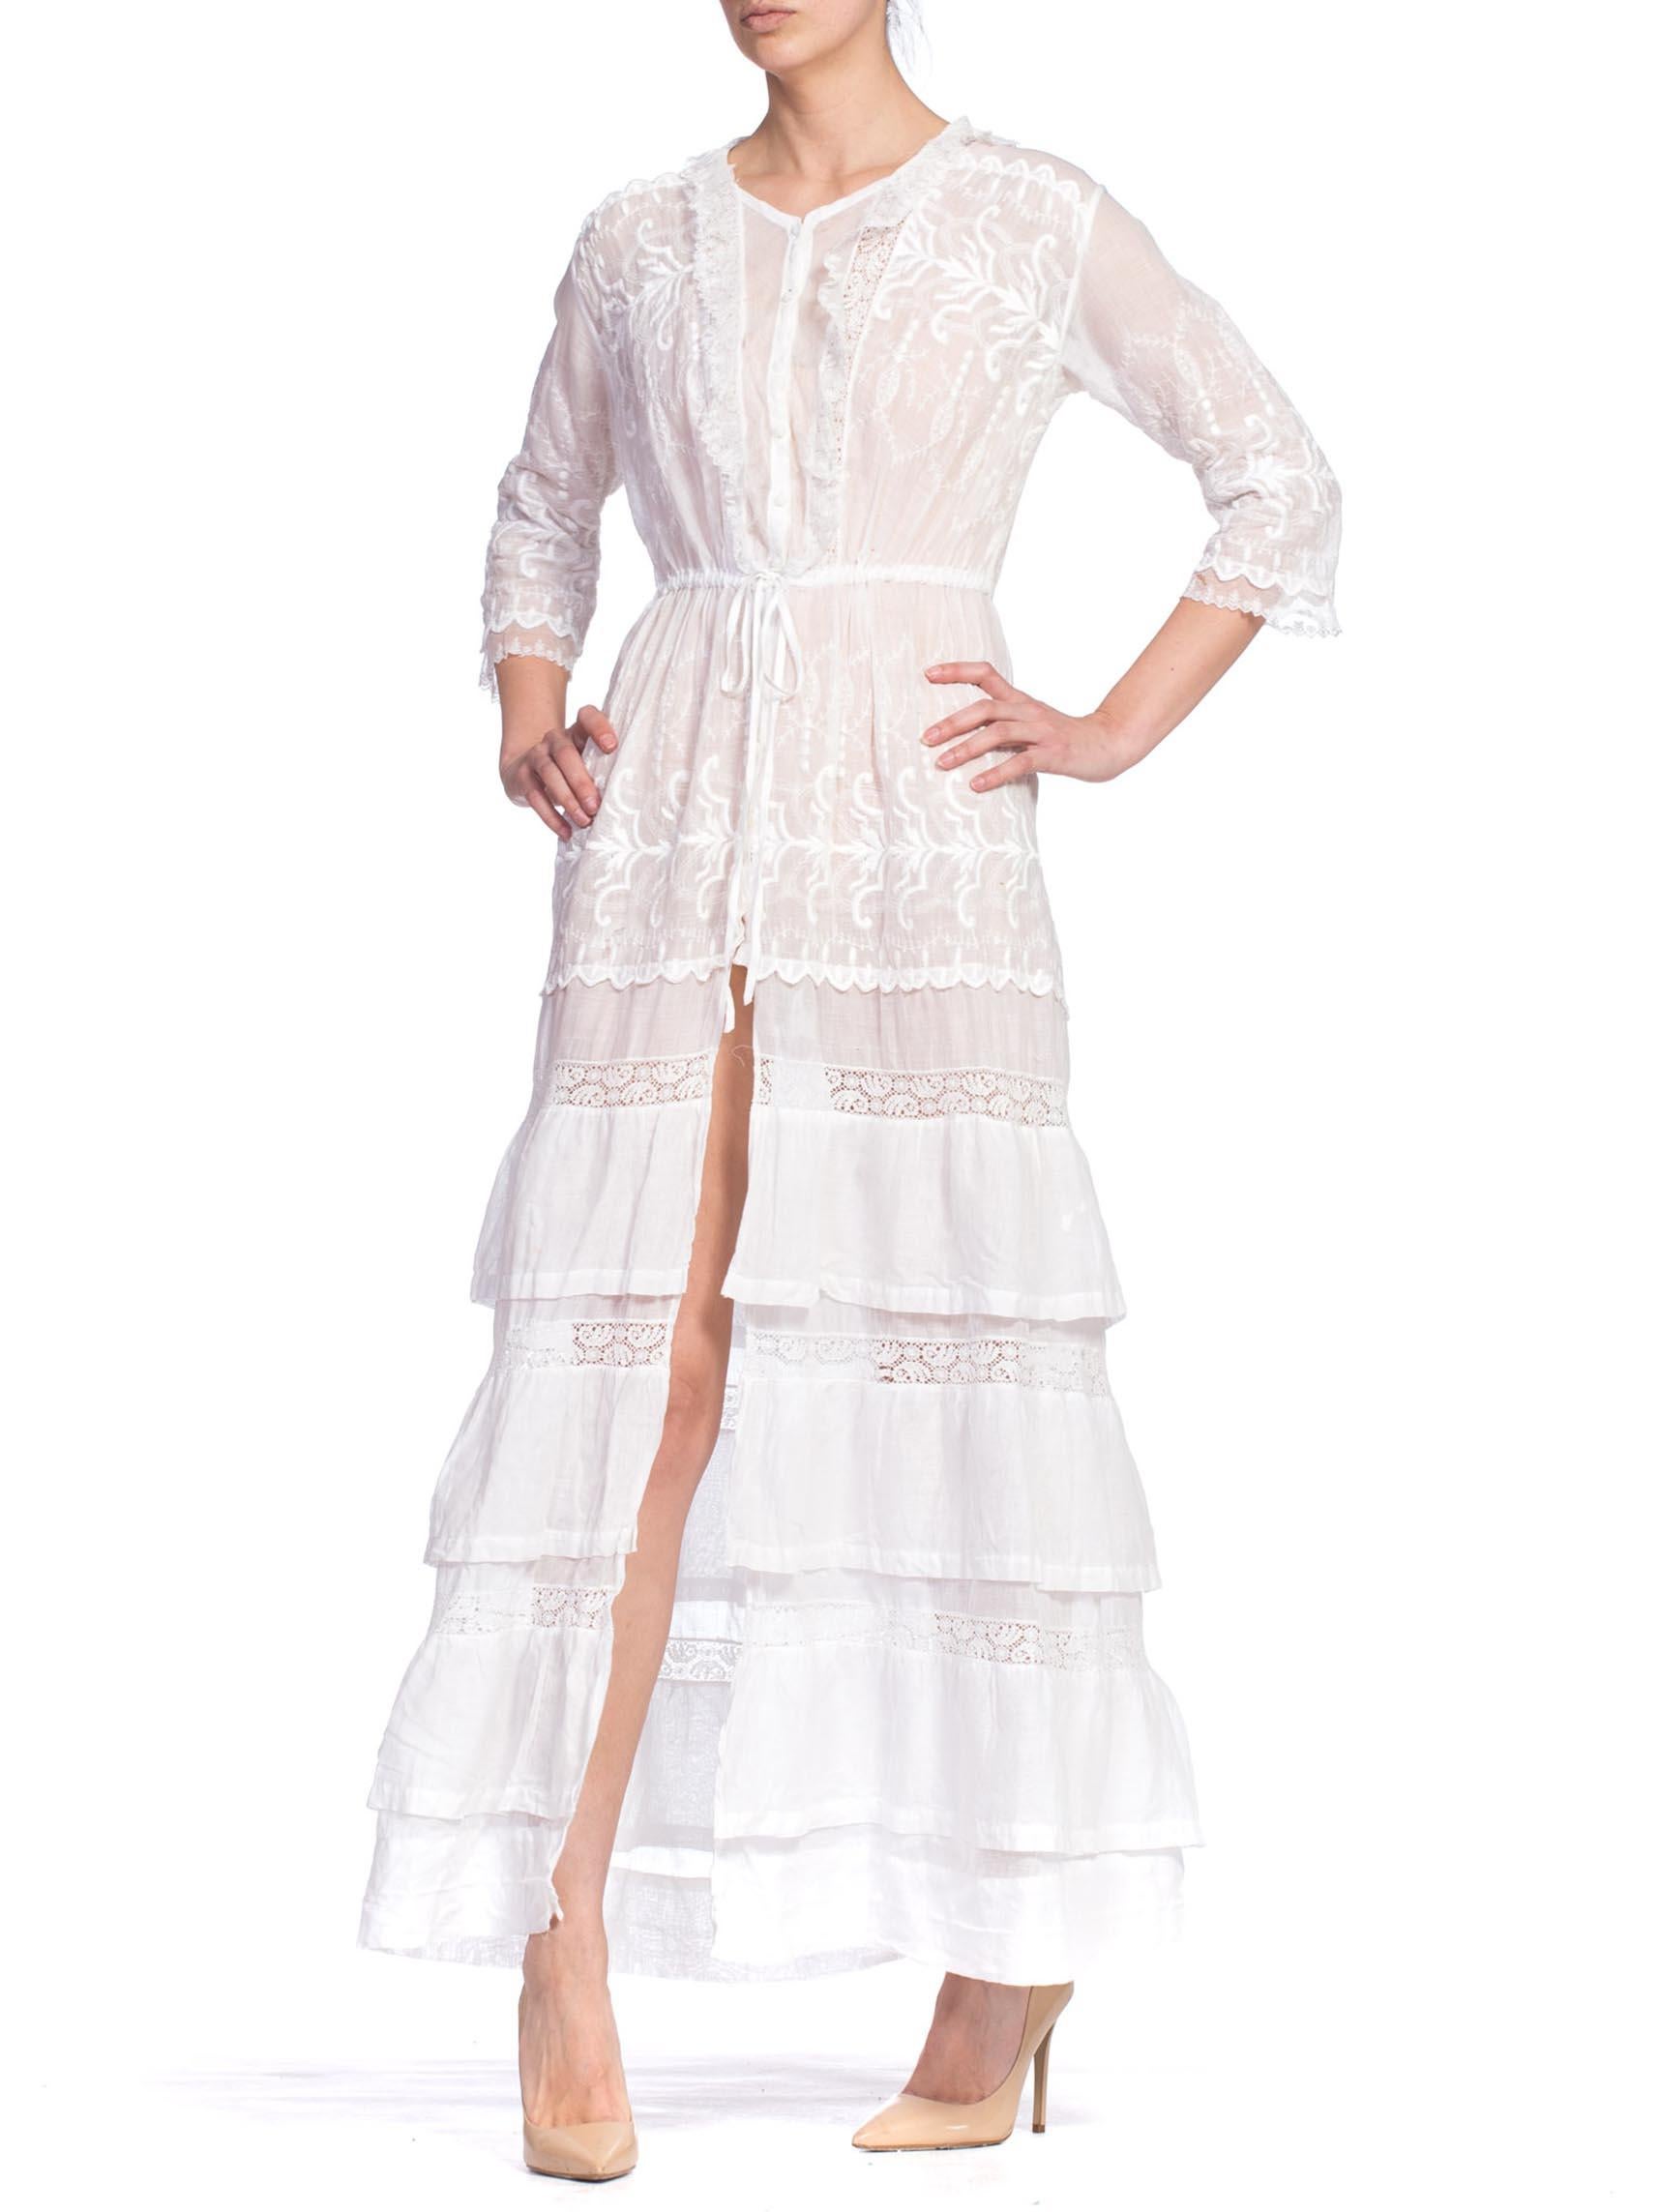 MORPHEW COLLECTION 1910'S  White Lace Dress
MORPHEW COLLECTION is made entirely by hand in our NYC Ateliér of rare antique materials sourced from around the globe. Our sustainable vintage materials represent over a century of design, many of the